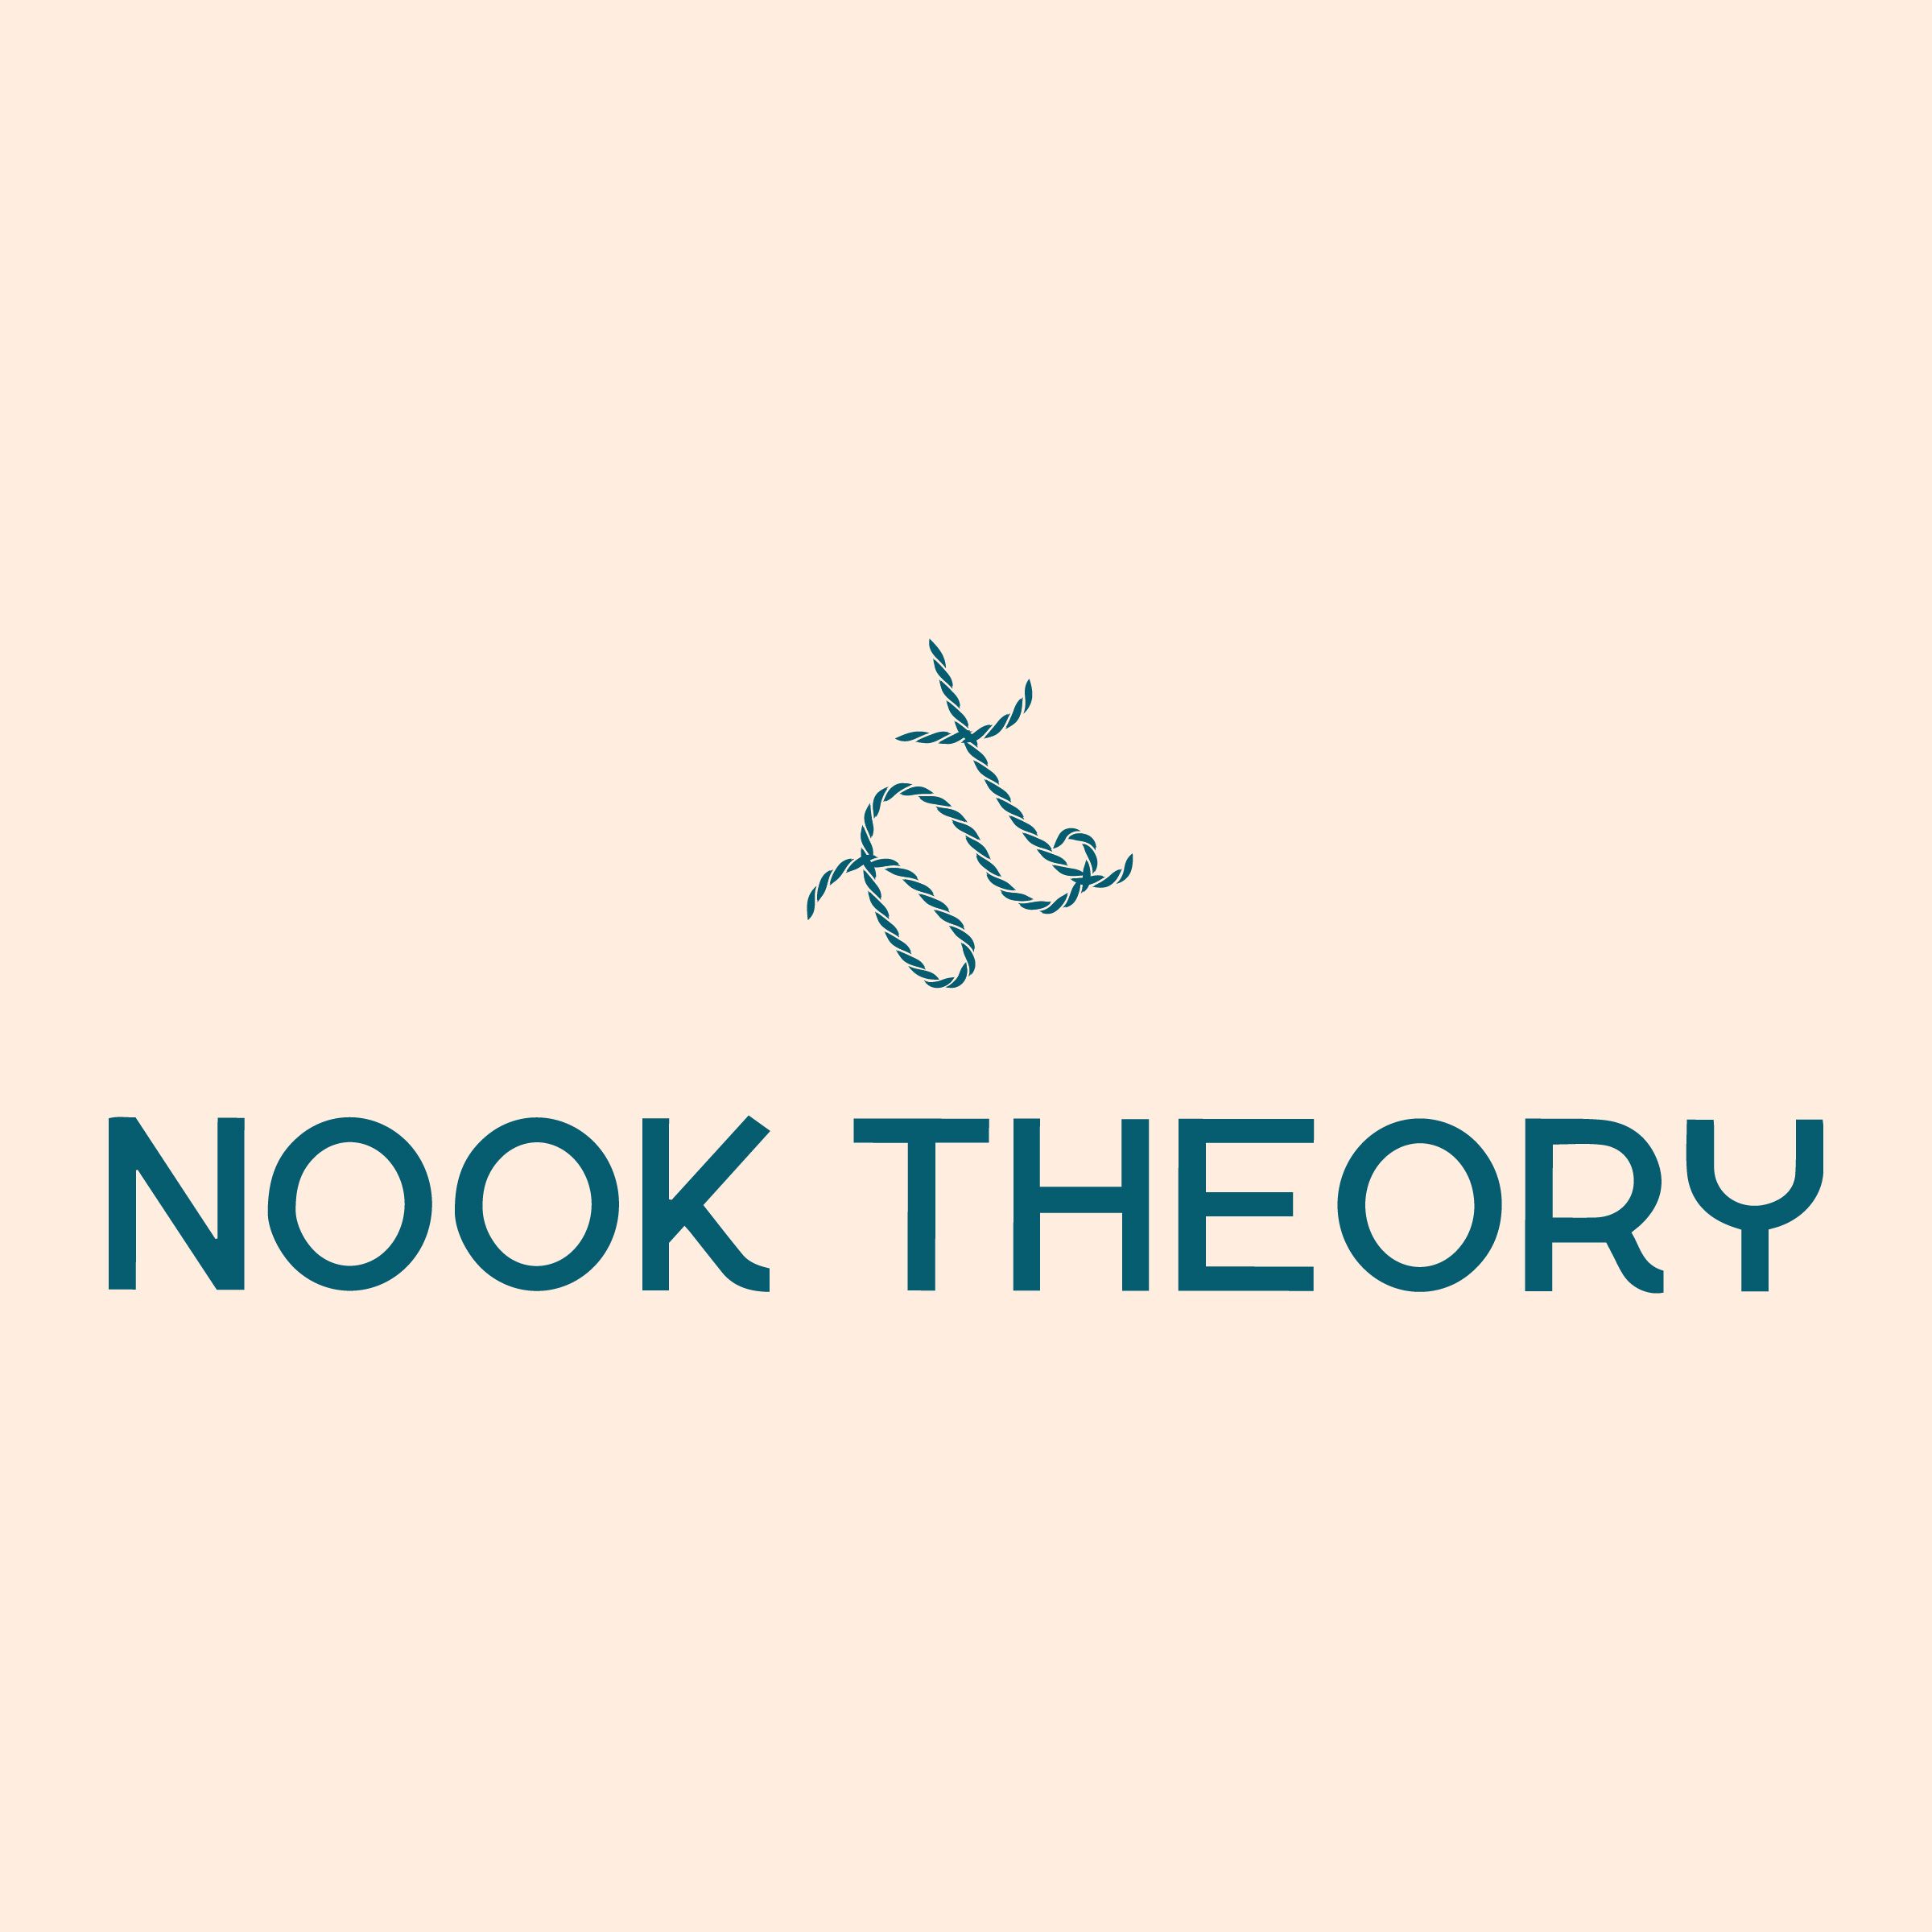 Nook Theory